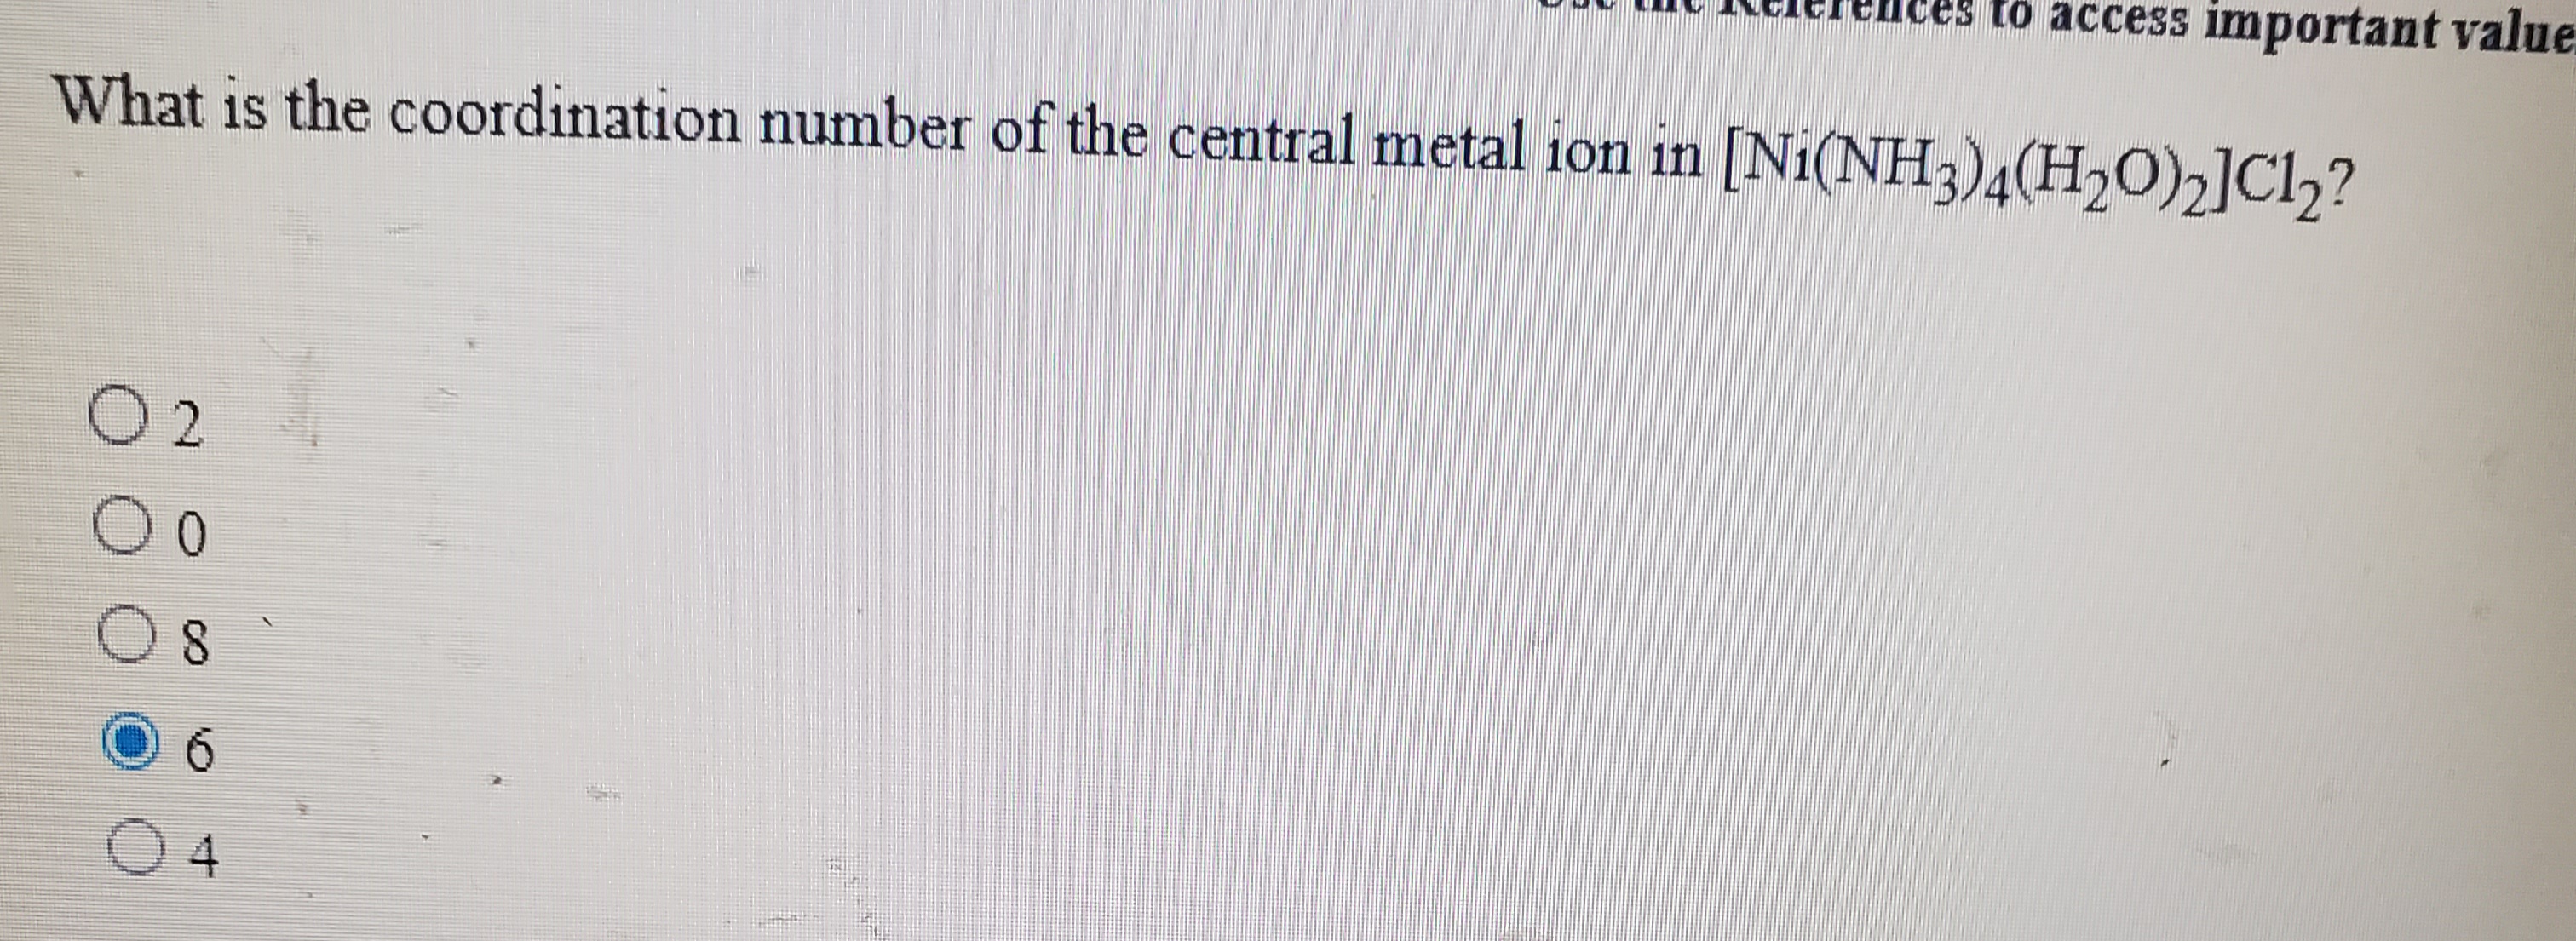 [Ni(NH3)4(H,O)2]Cl,?
What is the coordination number of the central metal 1on in
O 2
